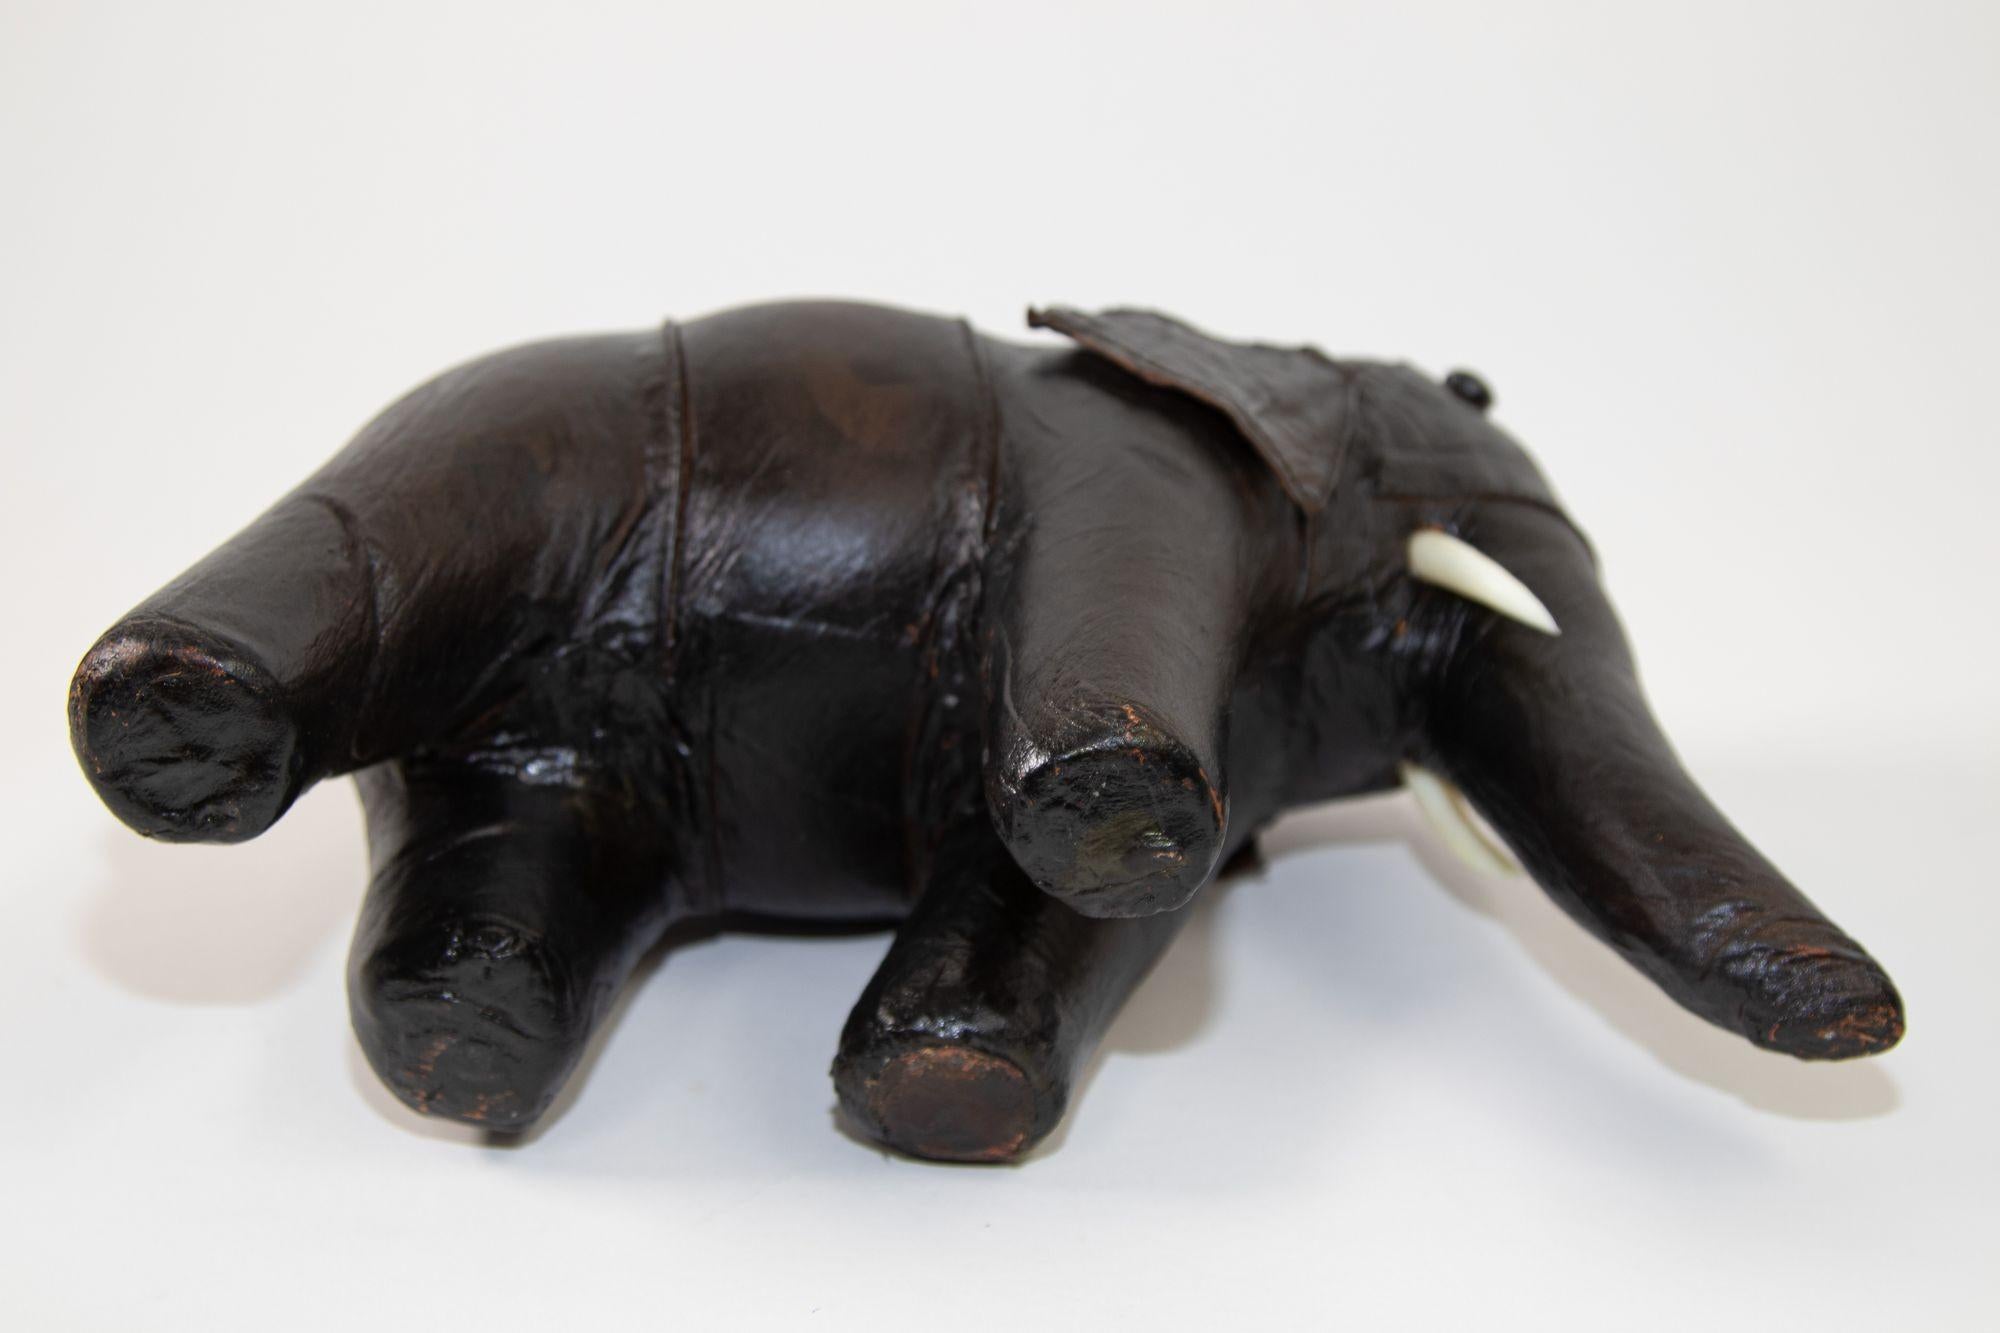 Black Leather Stuffed Elephant Toy In Good Condition For Sale In North Hollywood, CA